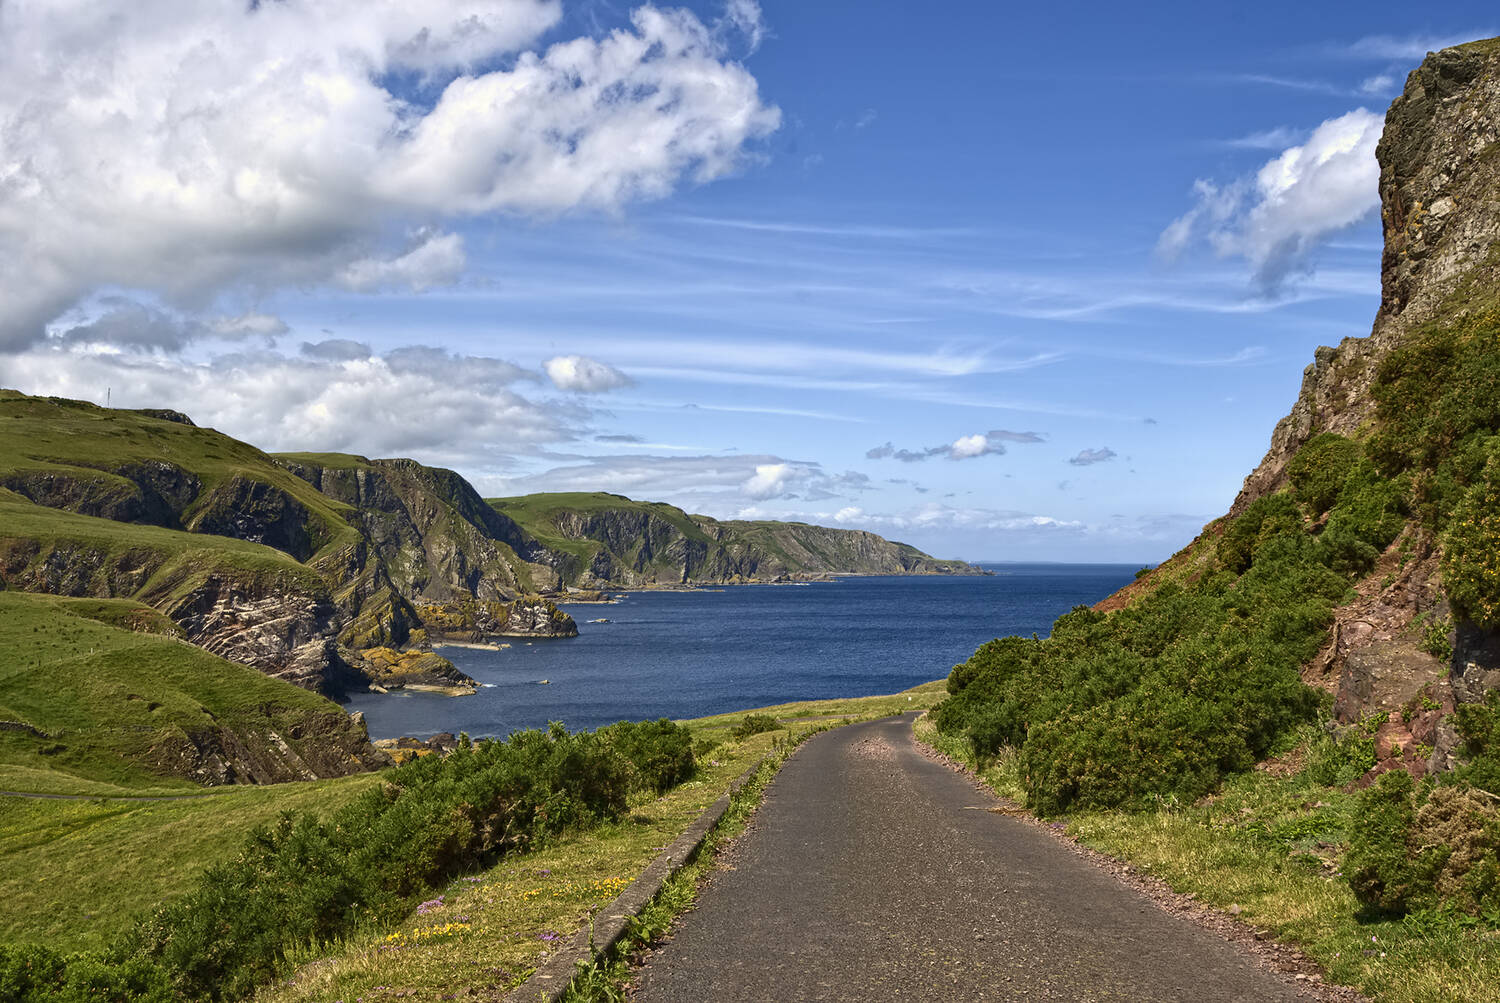 A road leads towards the coast beside cliffs. The sea is bright blue and white clouds float across the blue sky.